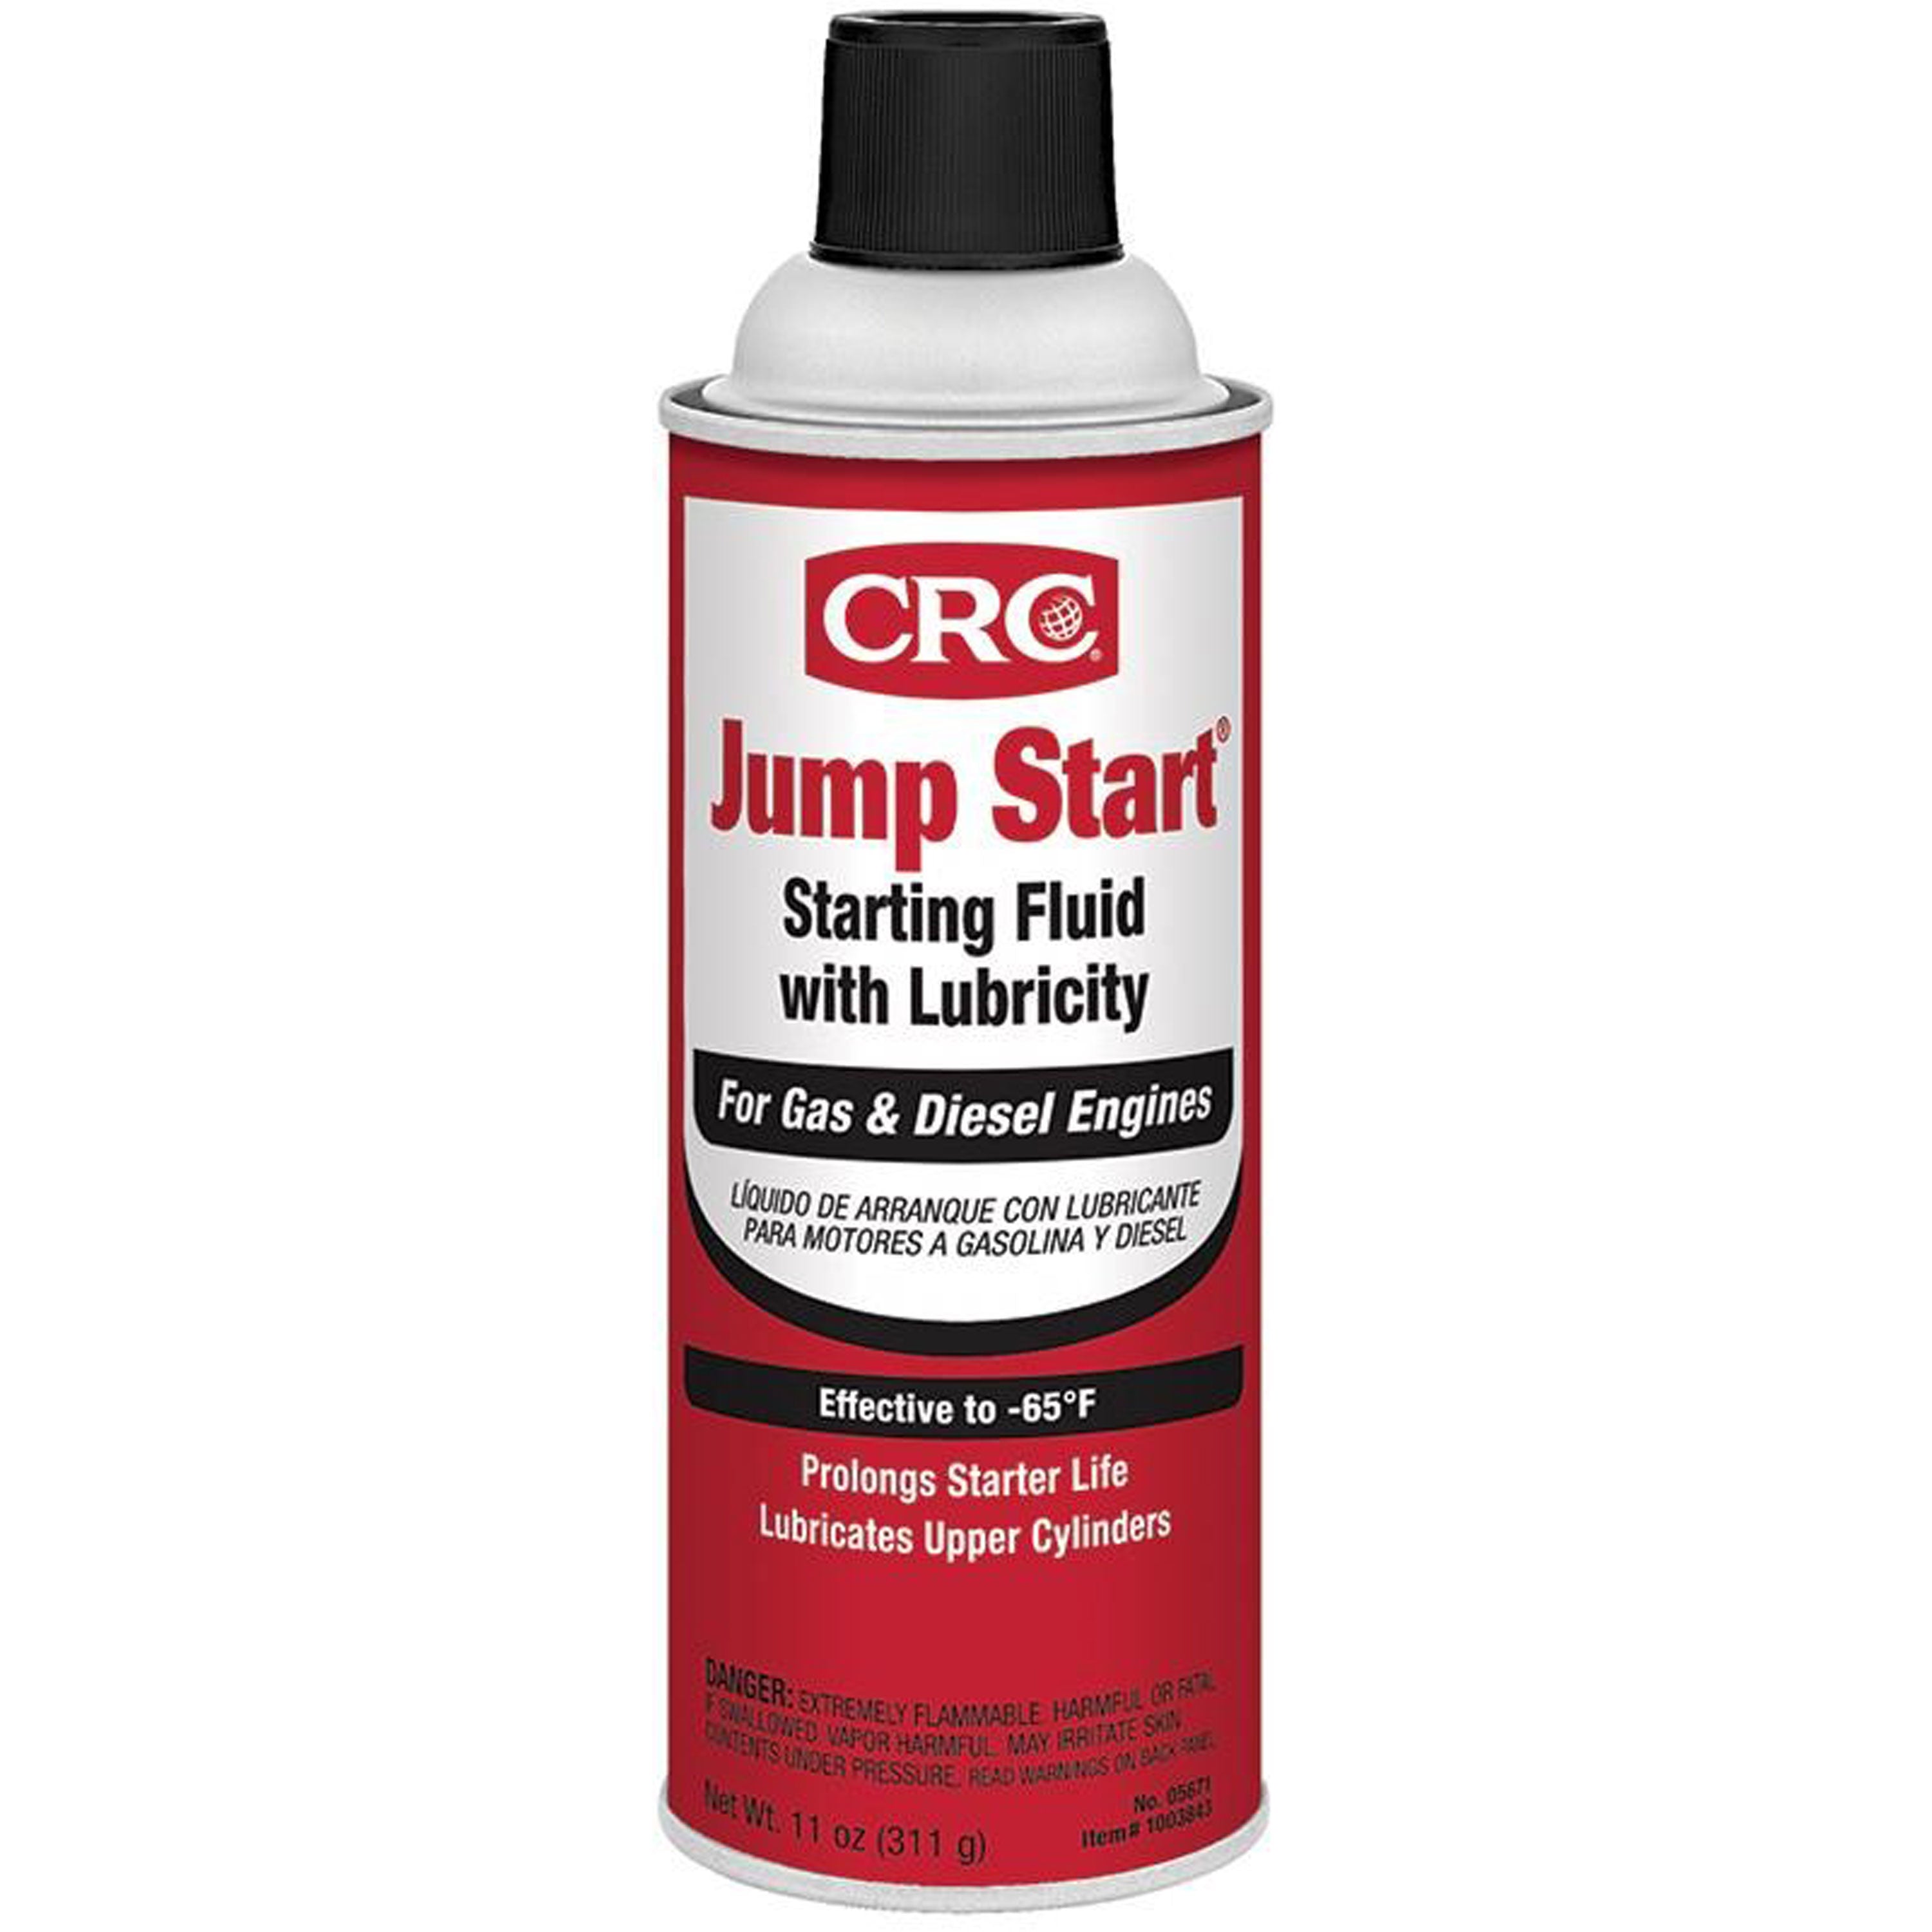 CRC 05671 Jump Start Starting Fluid with Lubricity - 11 oz.